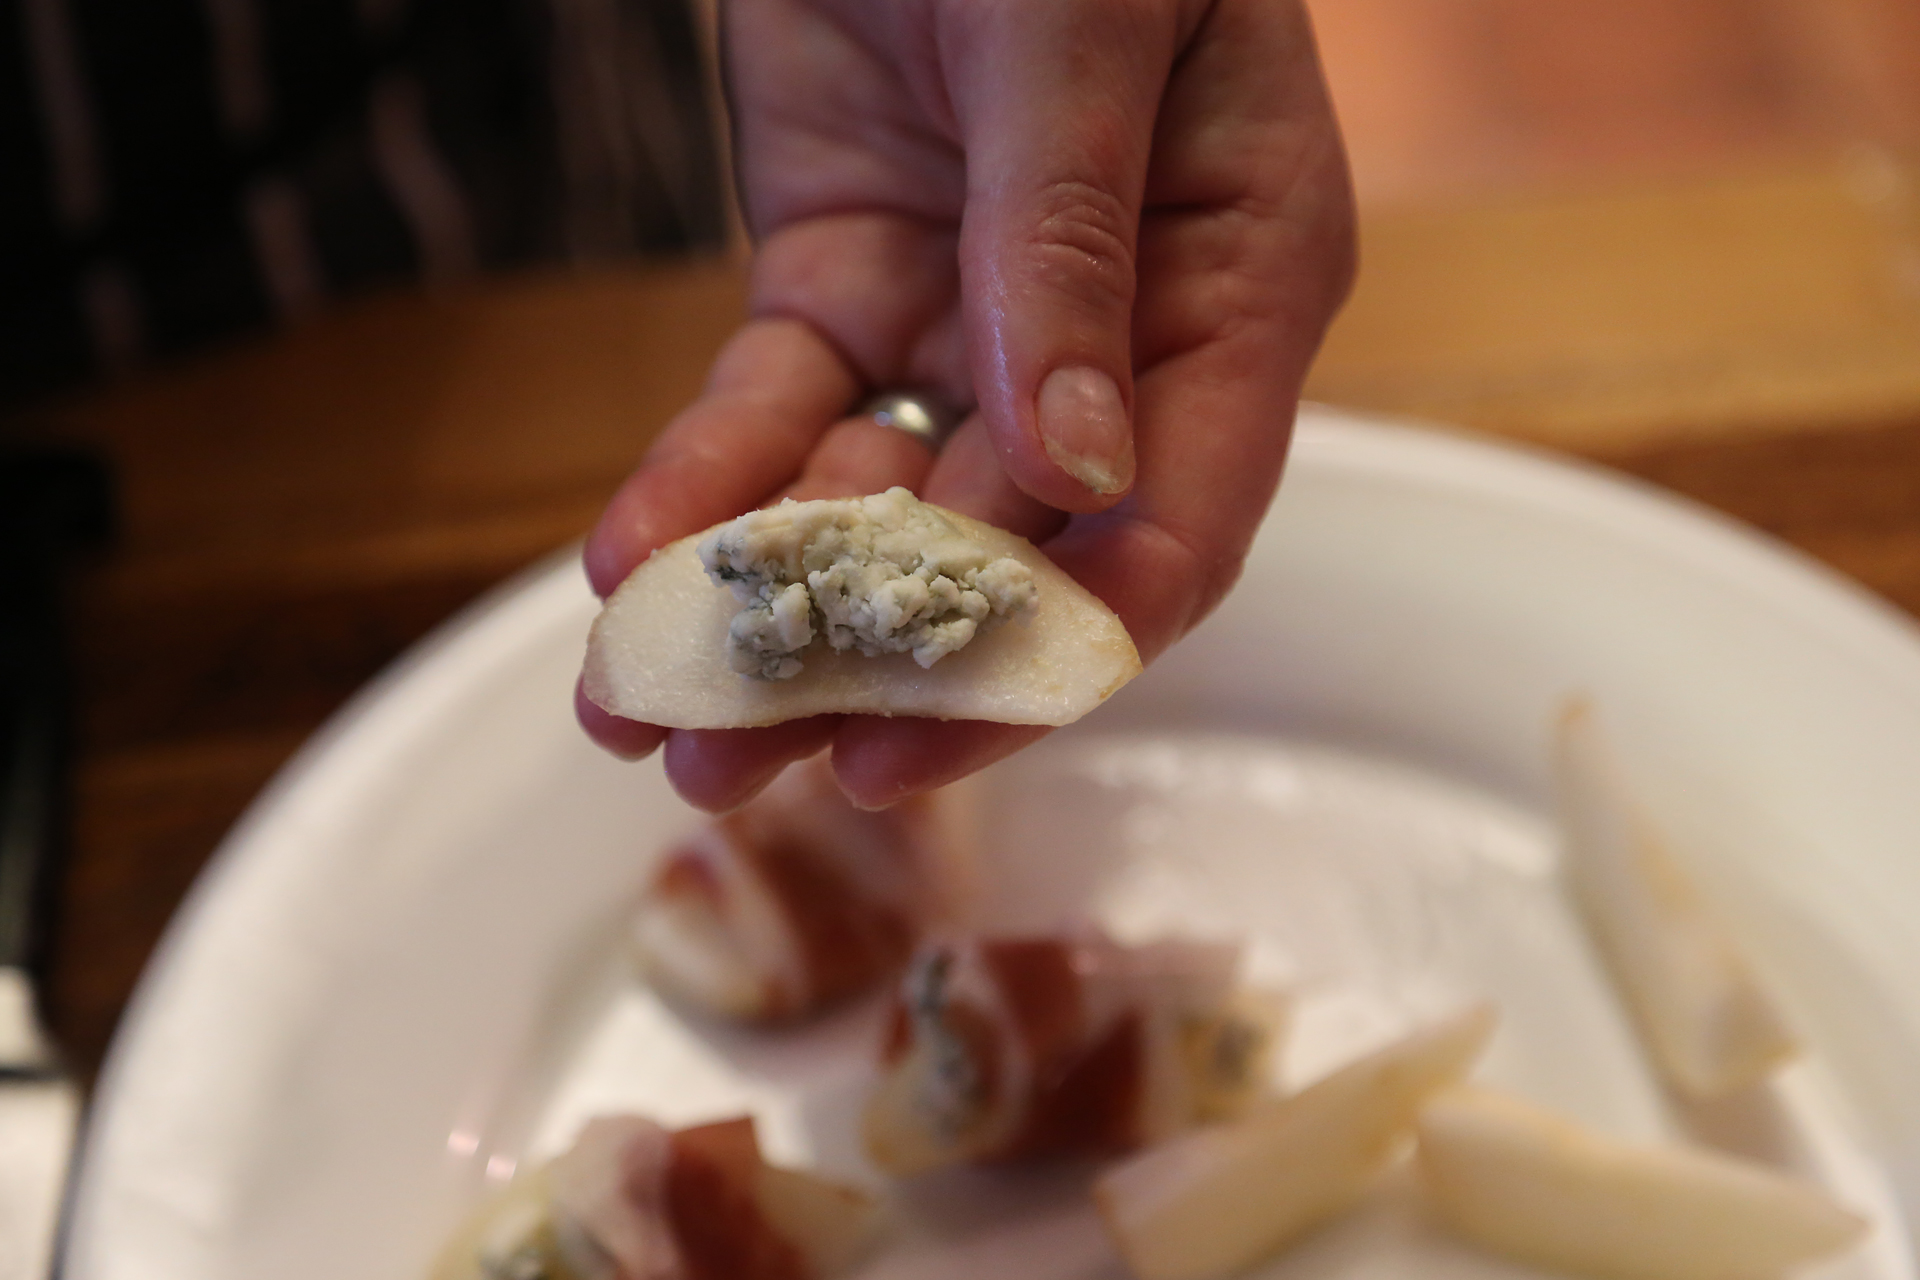 On each pear slice, press 1 tsp of blue cheese into a pile.